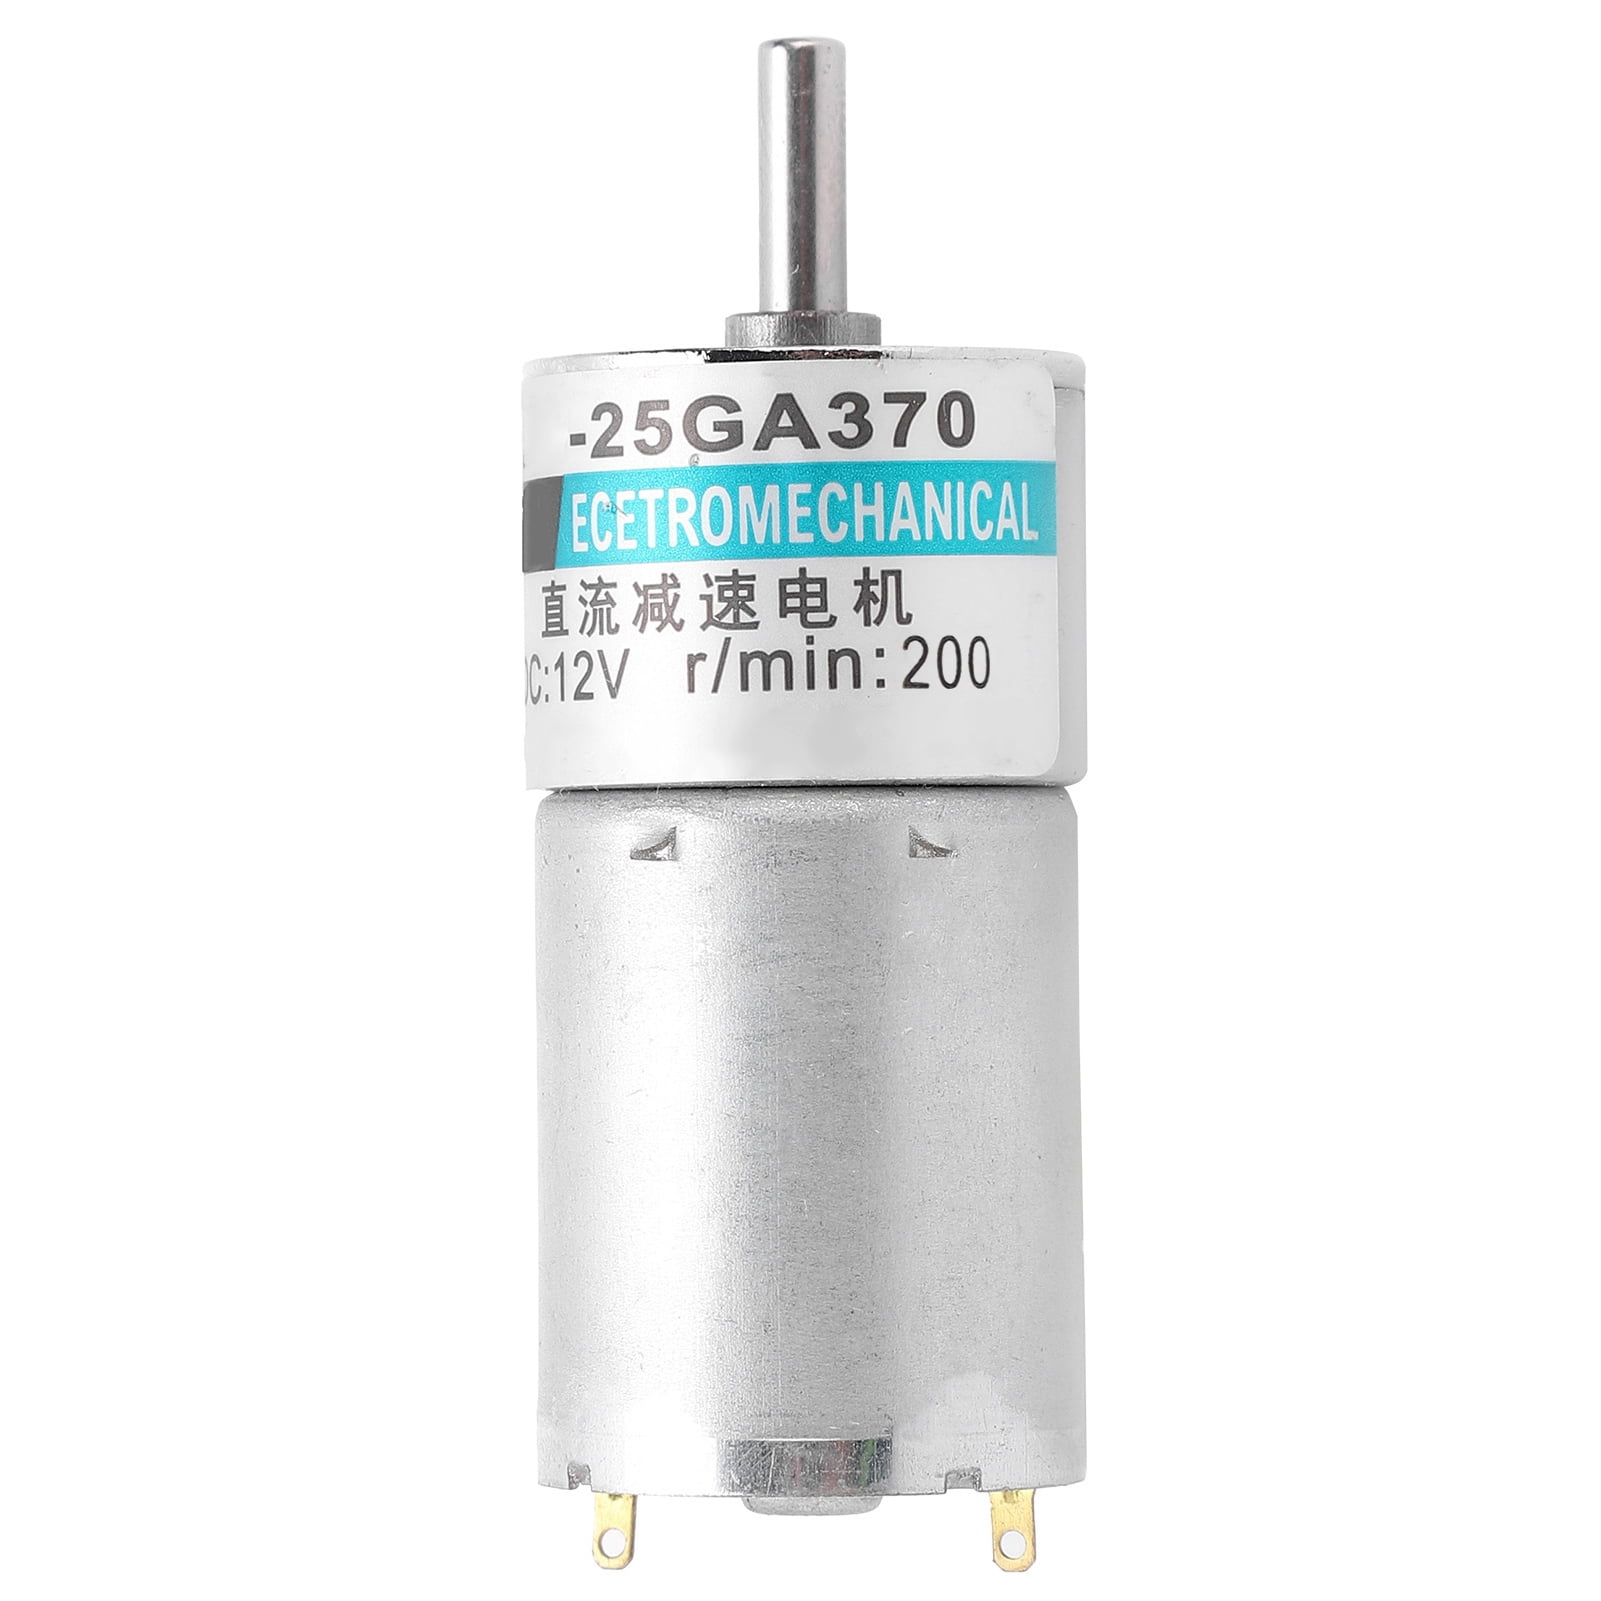 DC Gear Motor Micro Low Speed CW CCW Permanent Magnet Sport Control 12V ...